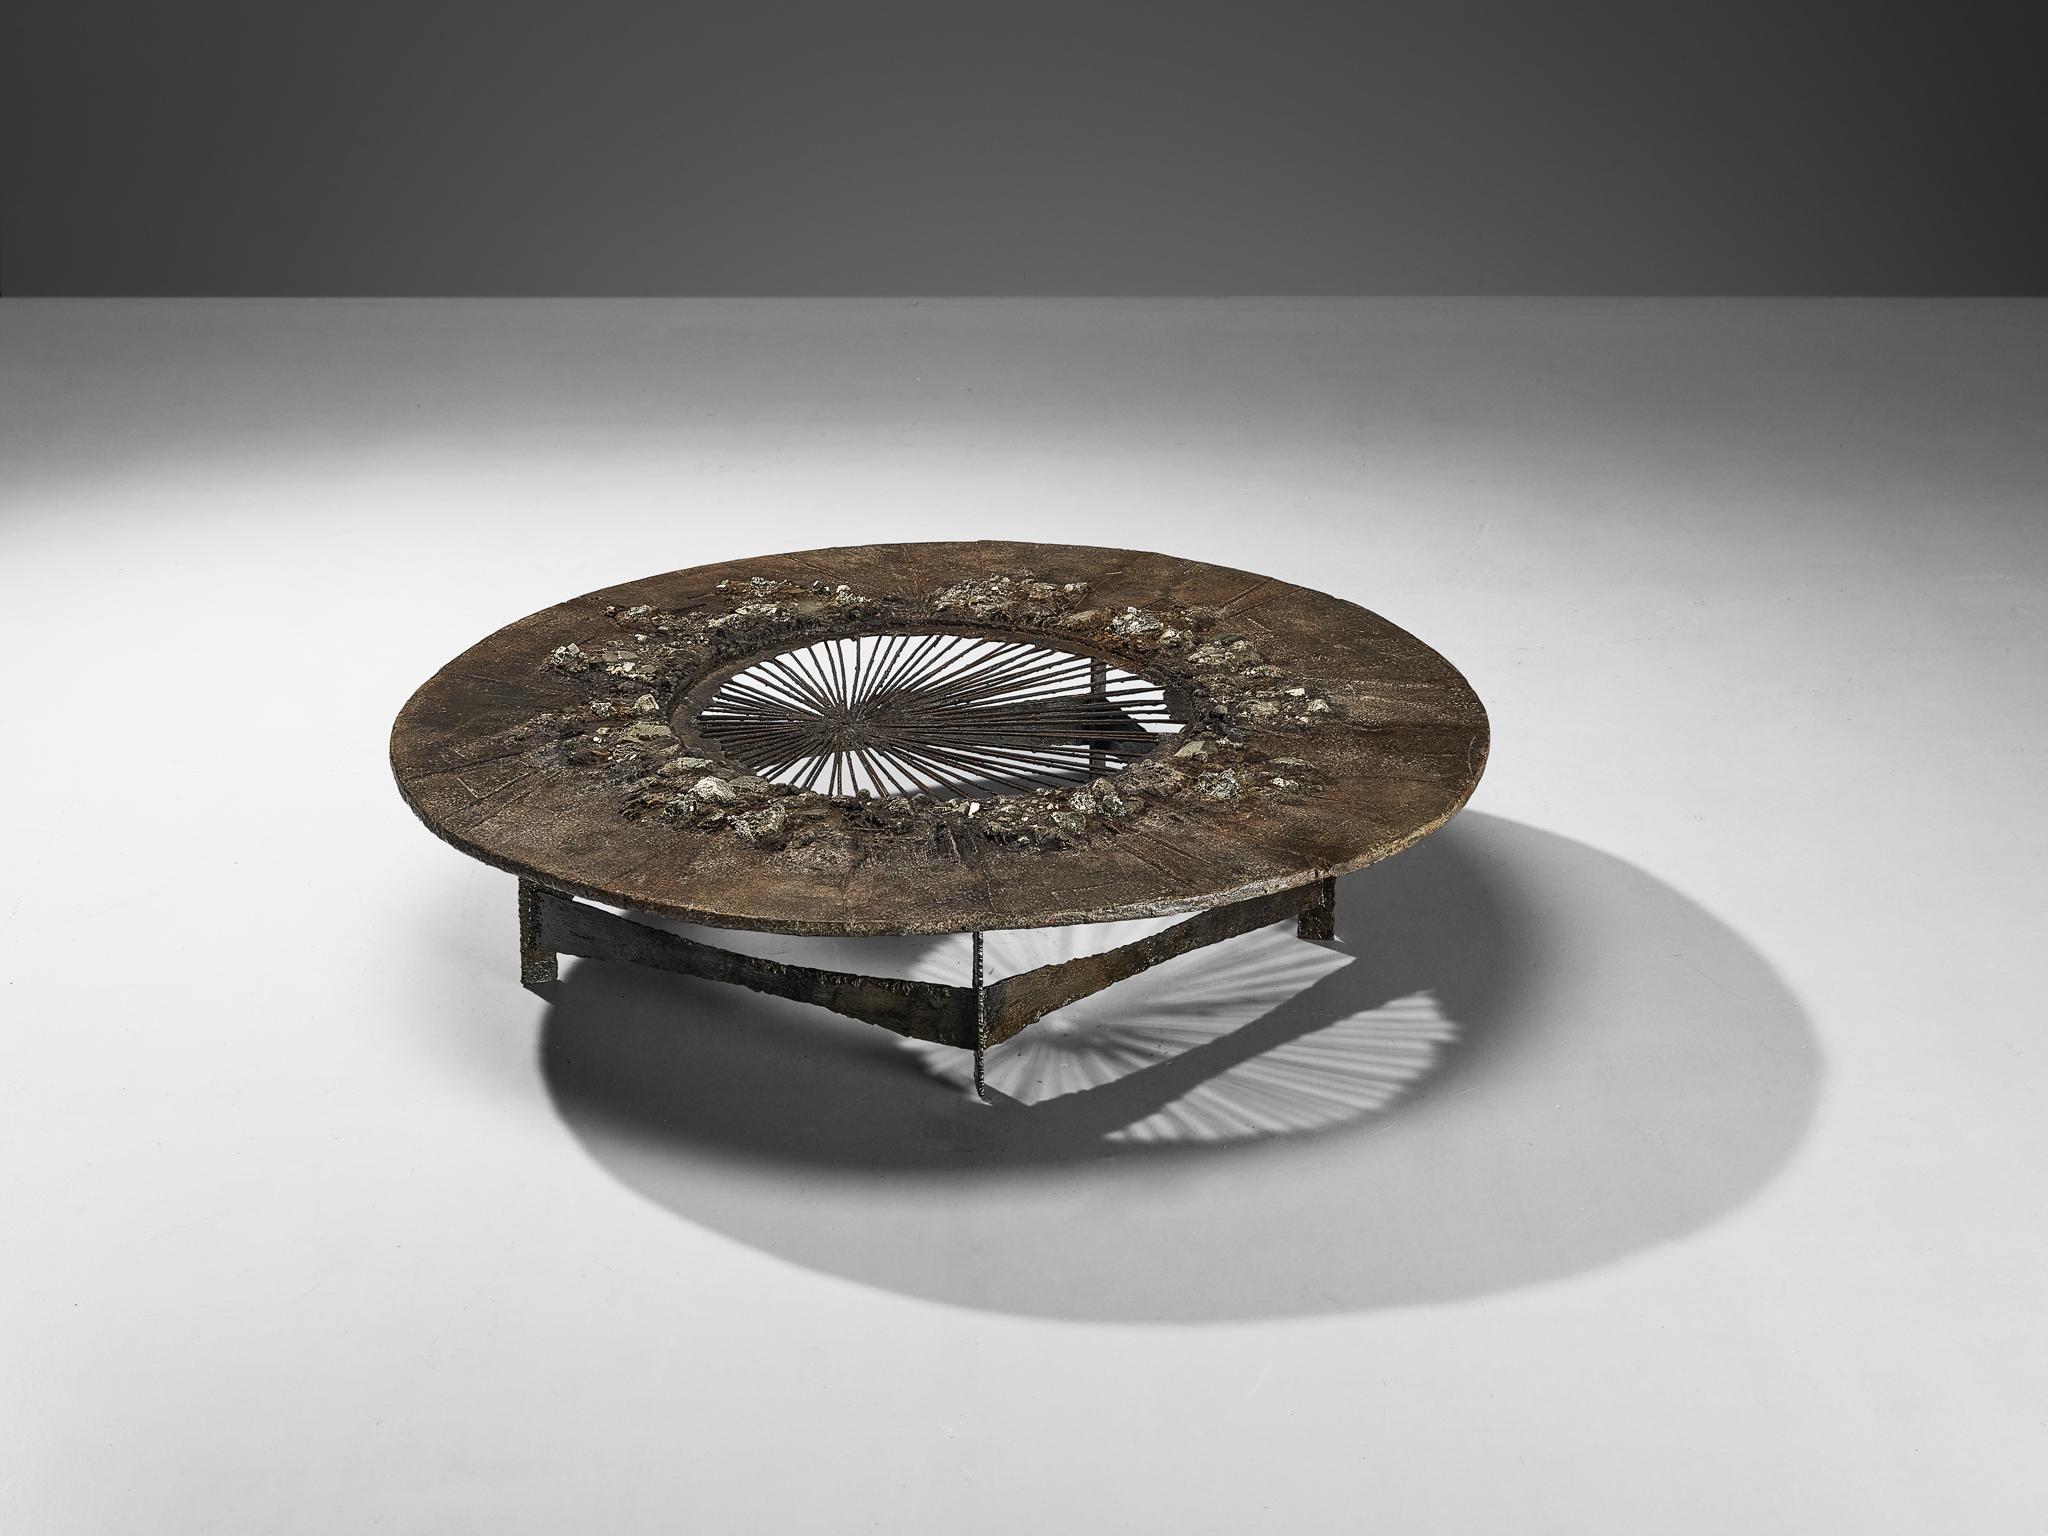 Pia Manu, coffee table, pyrite mineral, Ammonite, iron, burnished concrete, Belgium, 1960s

This rare, handmade coffee table made from a rather surprising juxtaposition of natural materials is designed in the workshop of Pia Manu. What makes this